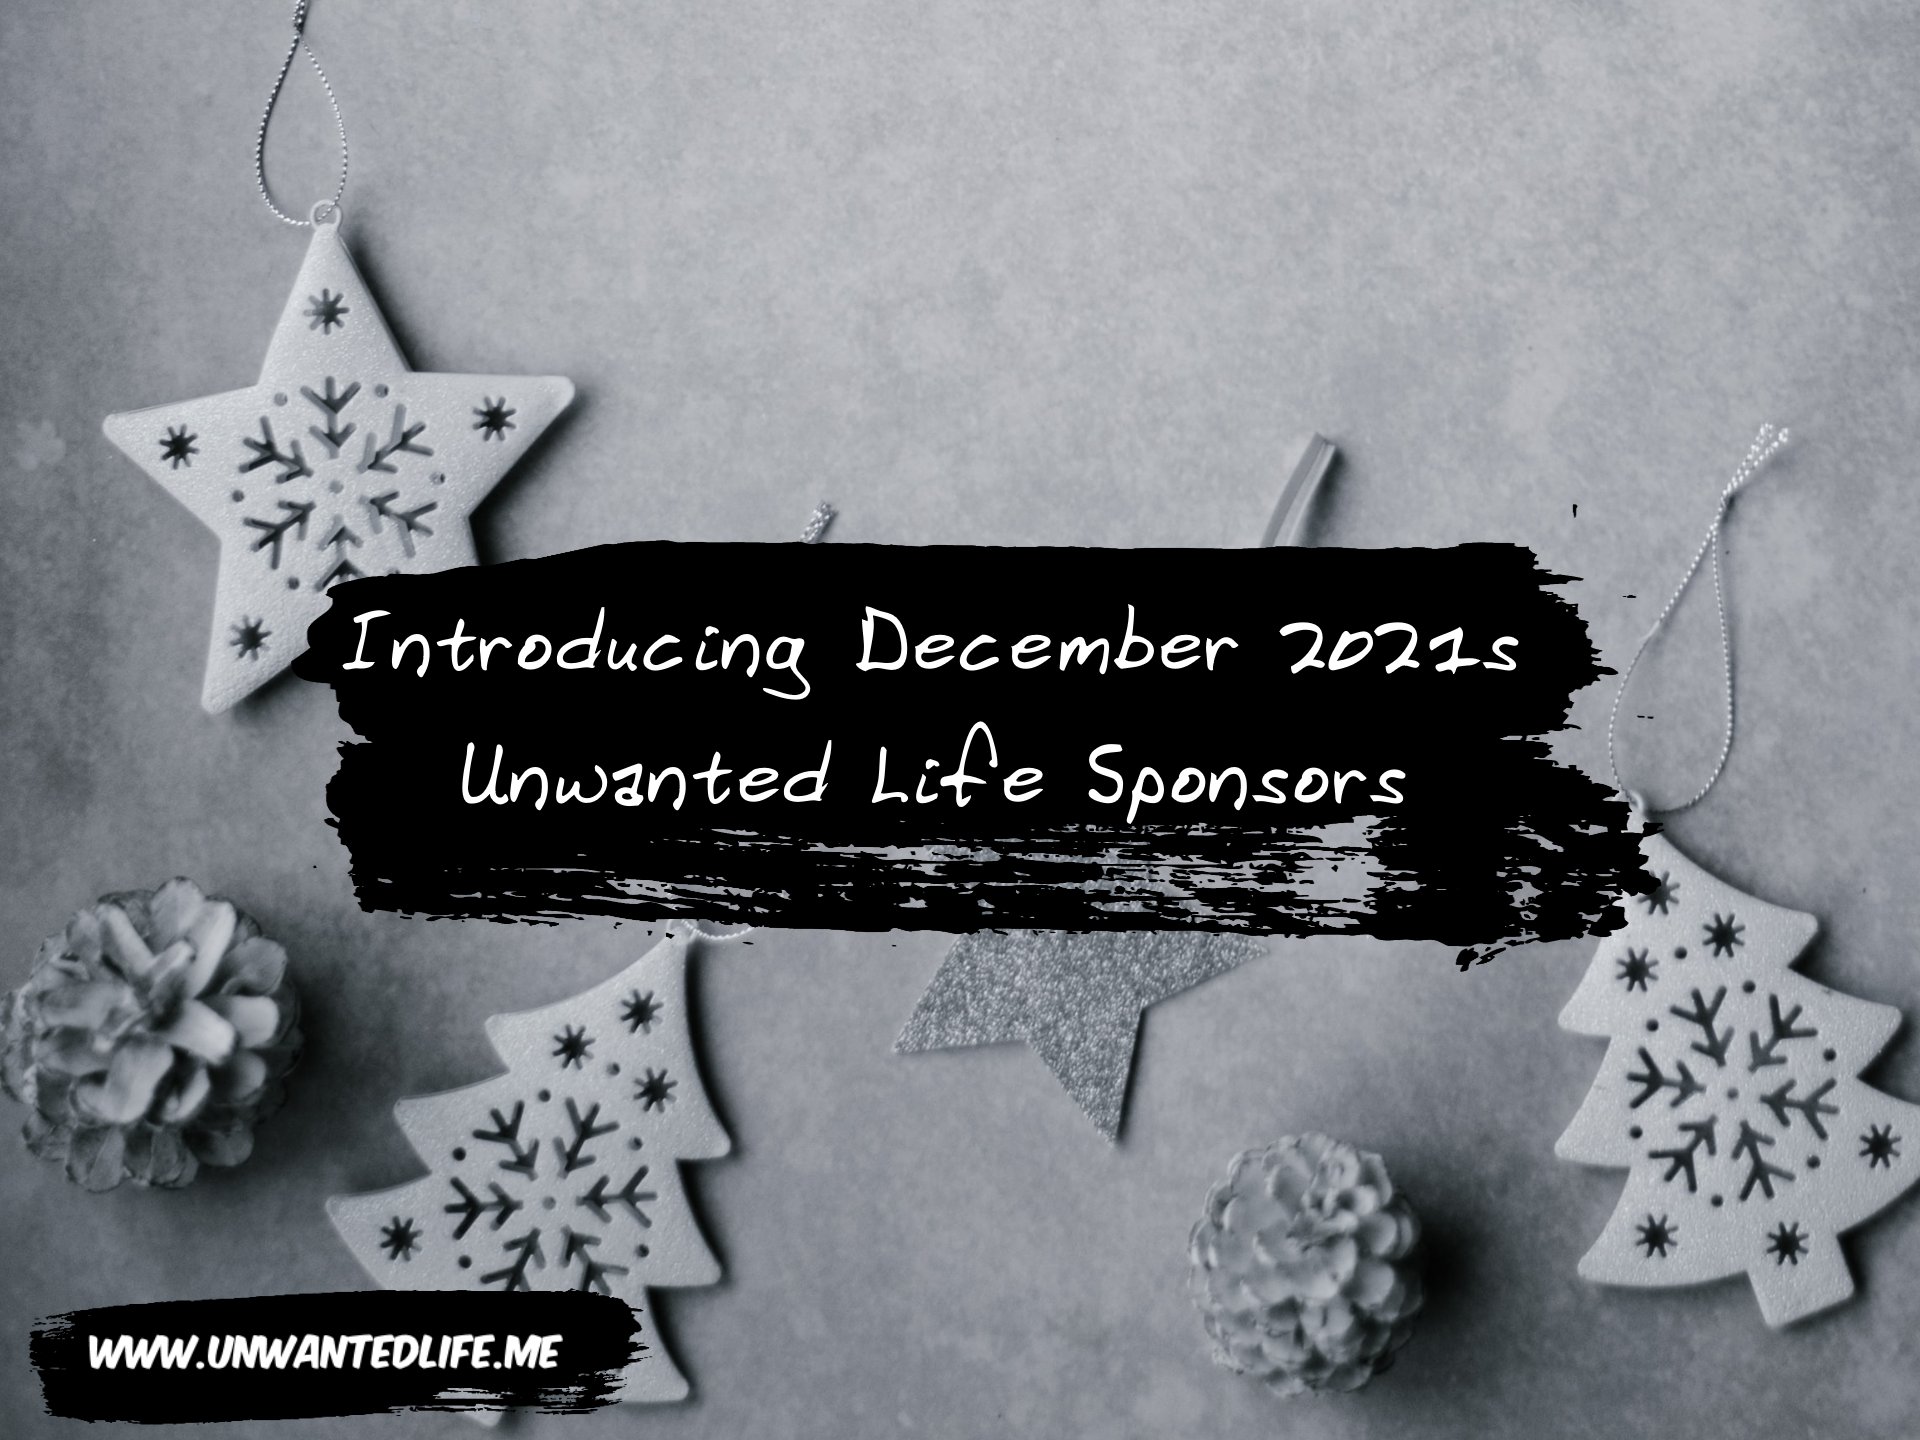 A white festive background of Christmas tress and stars with the title of the article over the top of the image: Introducing December 2021s Unwanted Life Sponsors